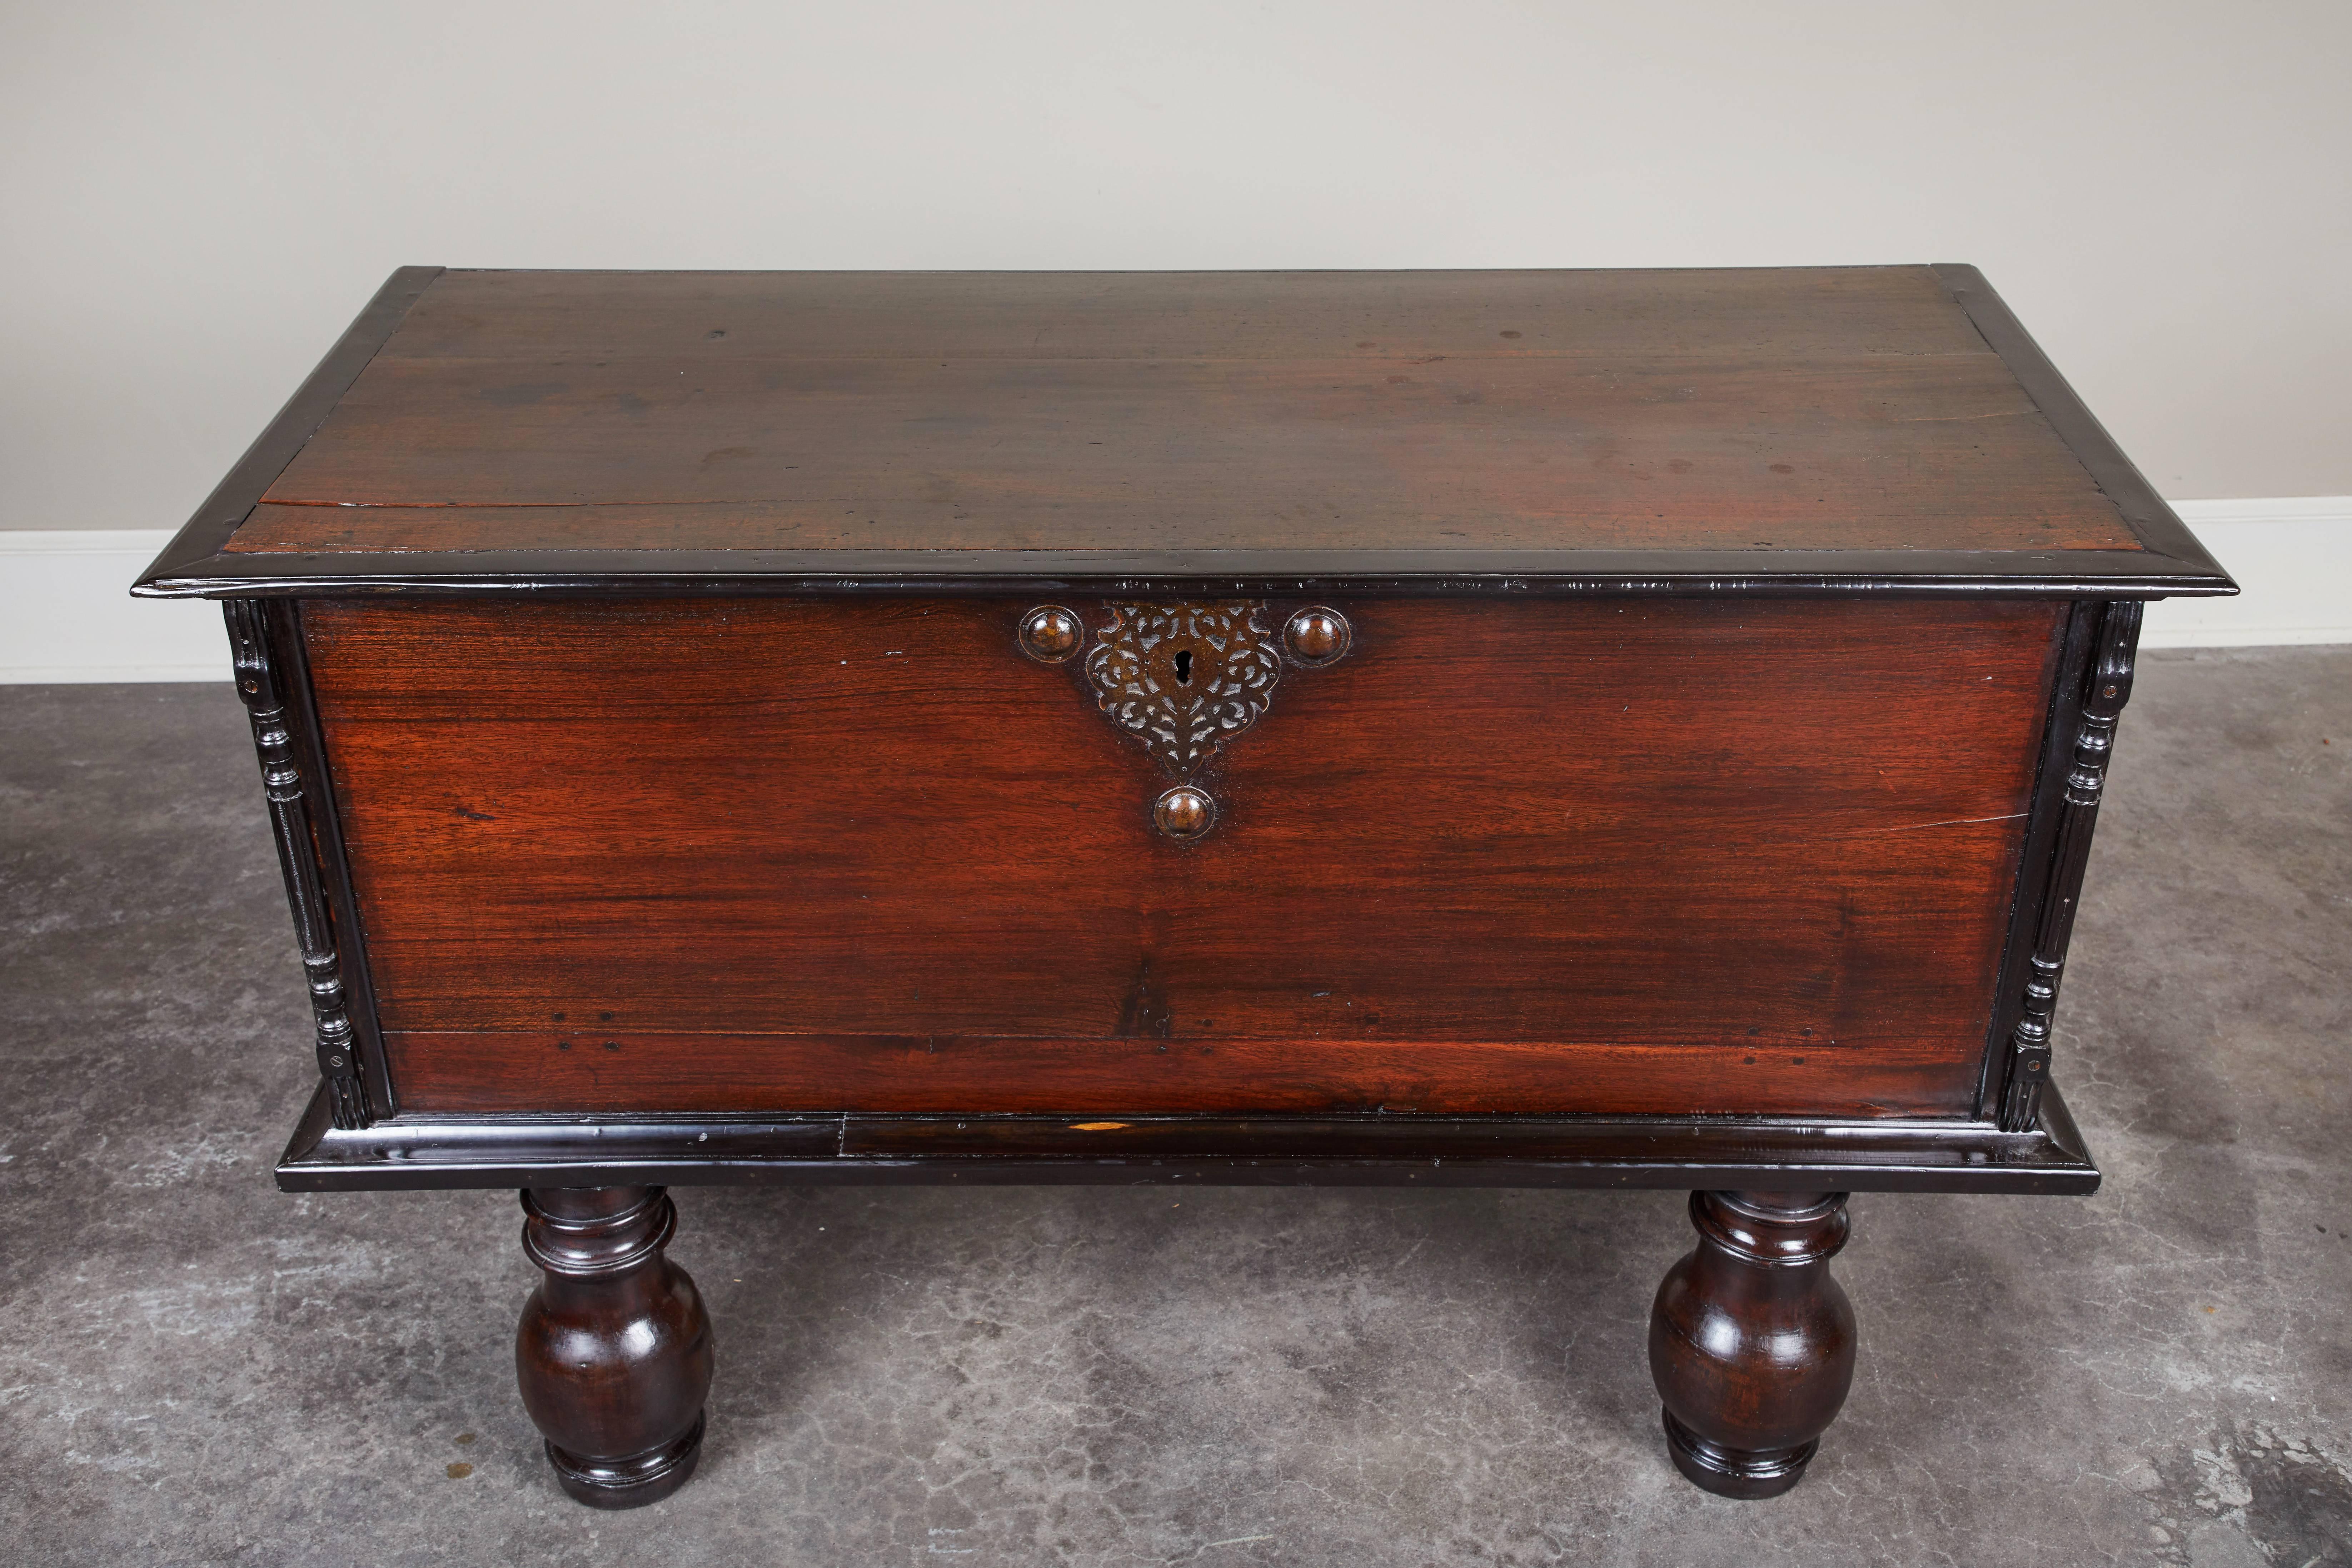 A 19th century British Colonial trunk comprised of jakwood and ebony. The trunk features a central hardware piece and carved columns on the sides. 